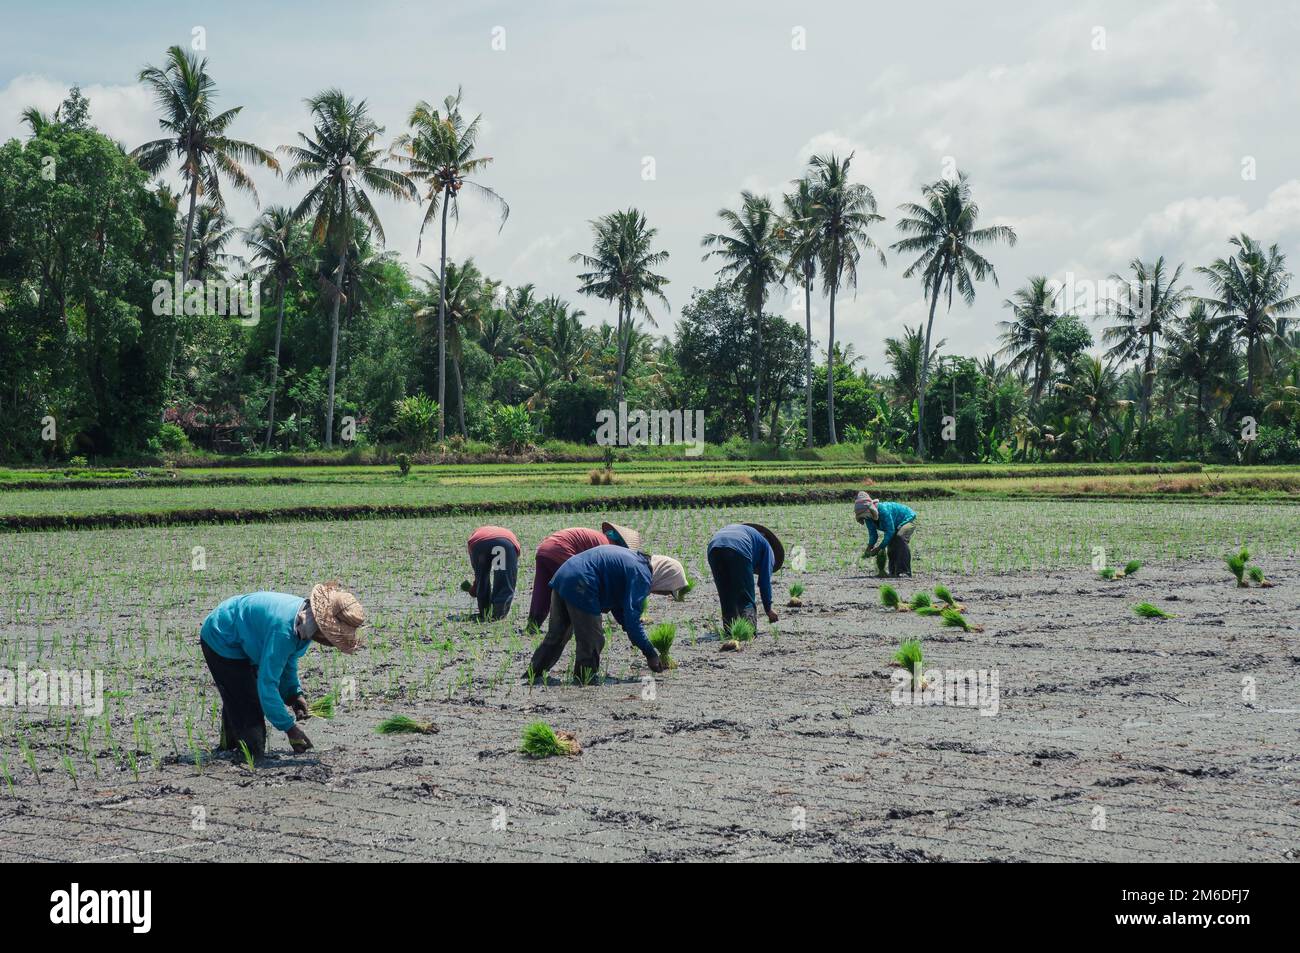 Farm workers planting rice in Indonesia Stock Photo